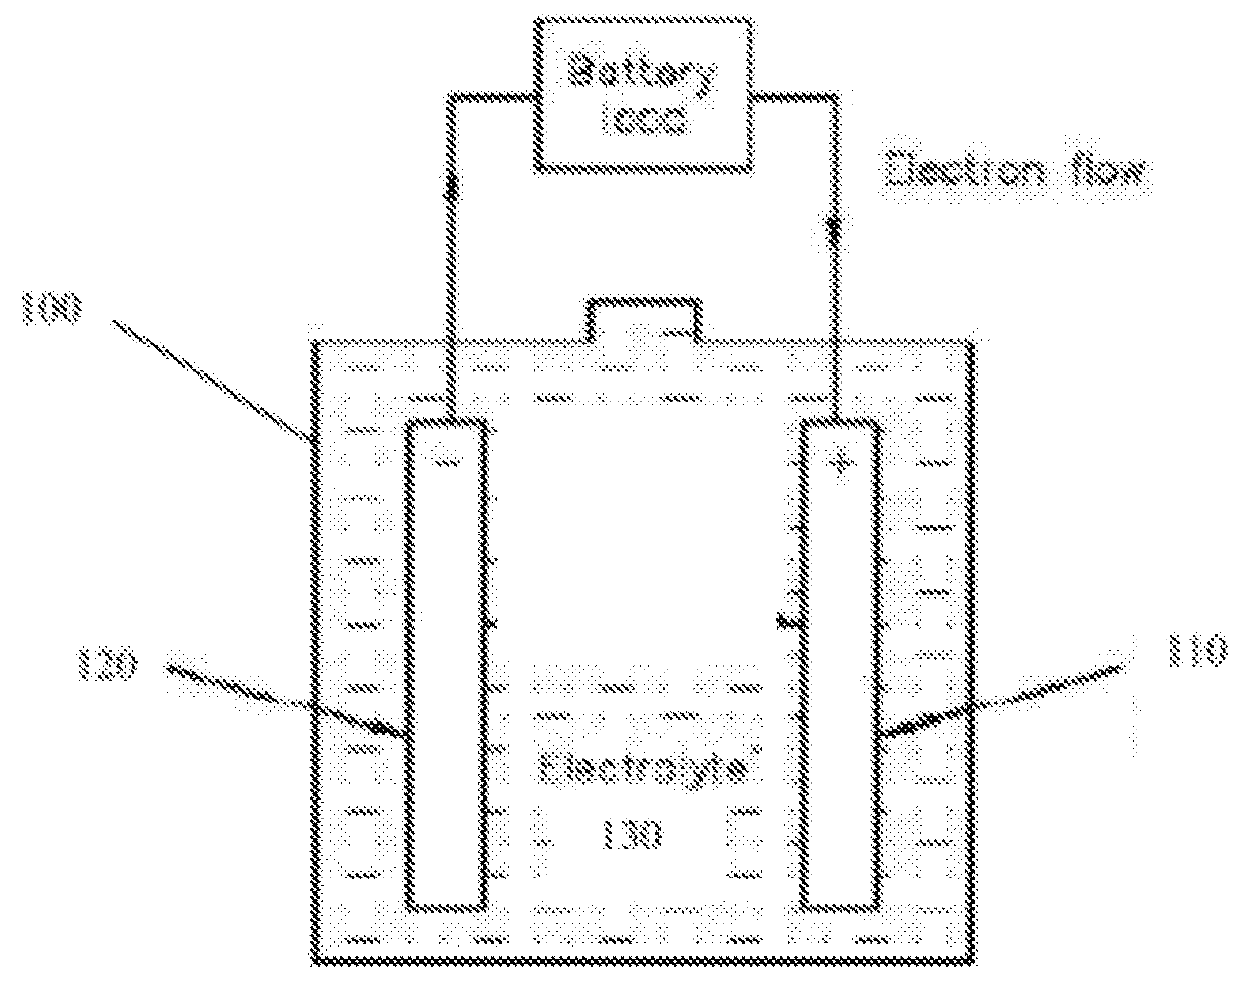 Method of activating two-dimensional materials for multivalent/polyatomic-ion intercalation battery electrodes